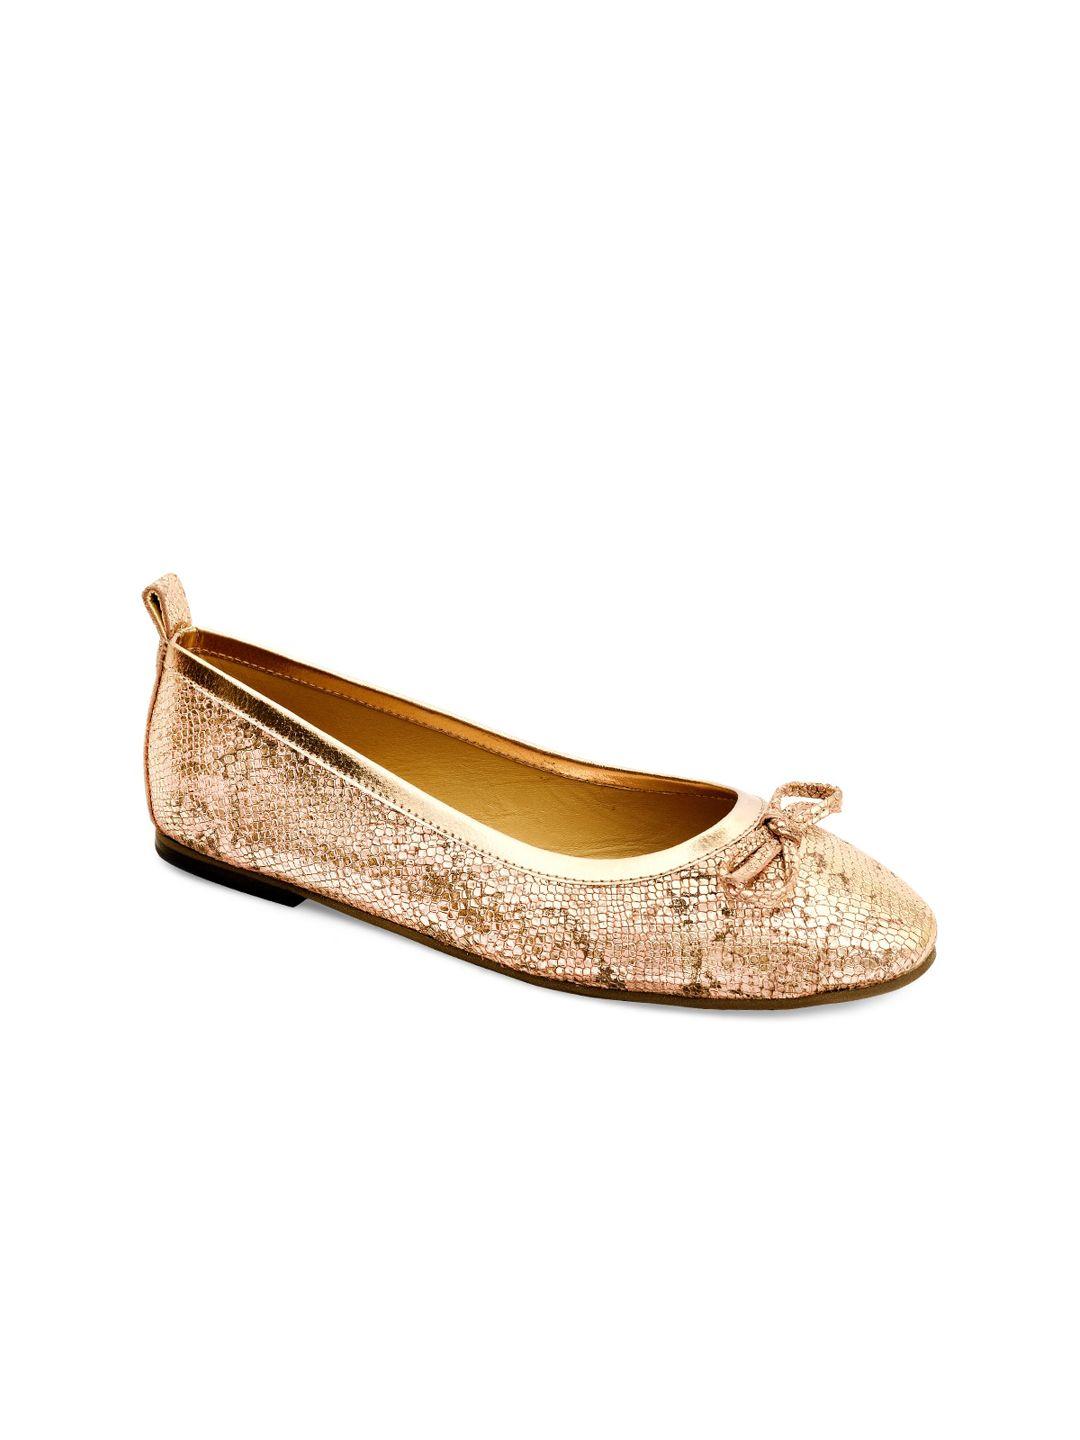 eske-women-gold-toned-textured-ballerinas-with-bows-flats